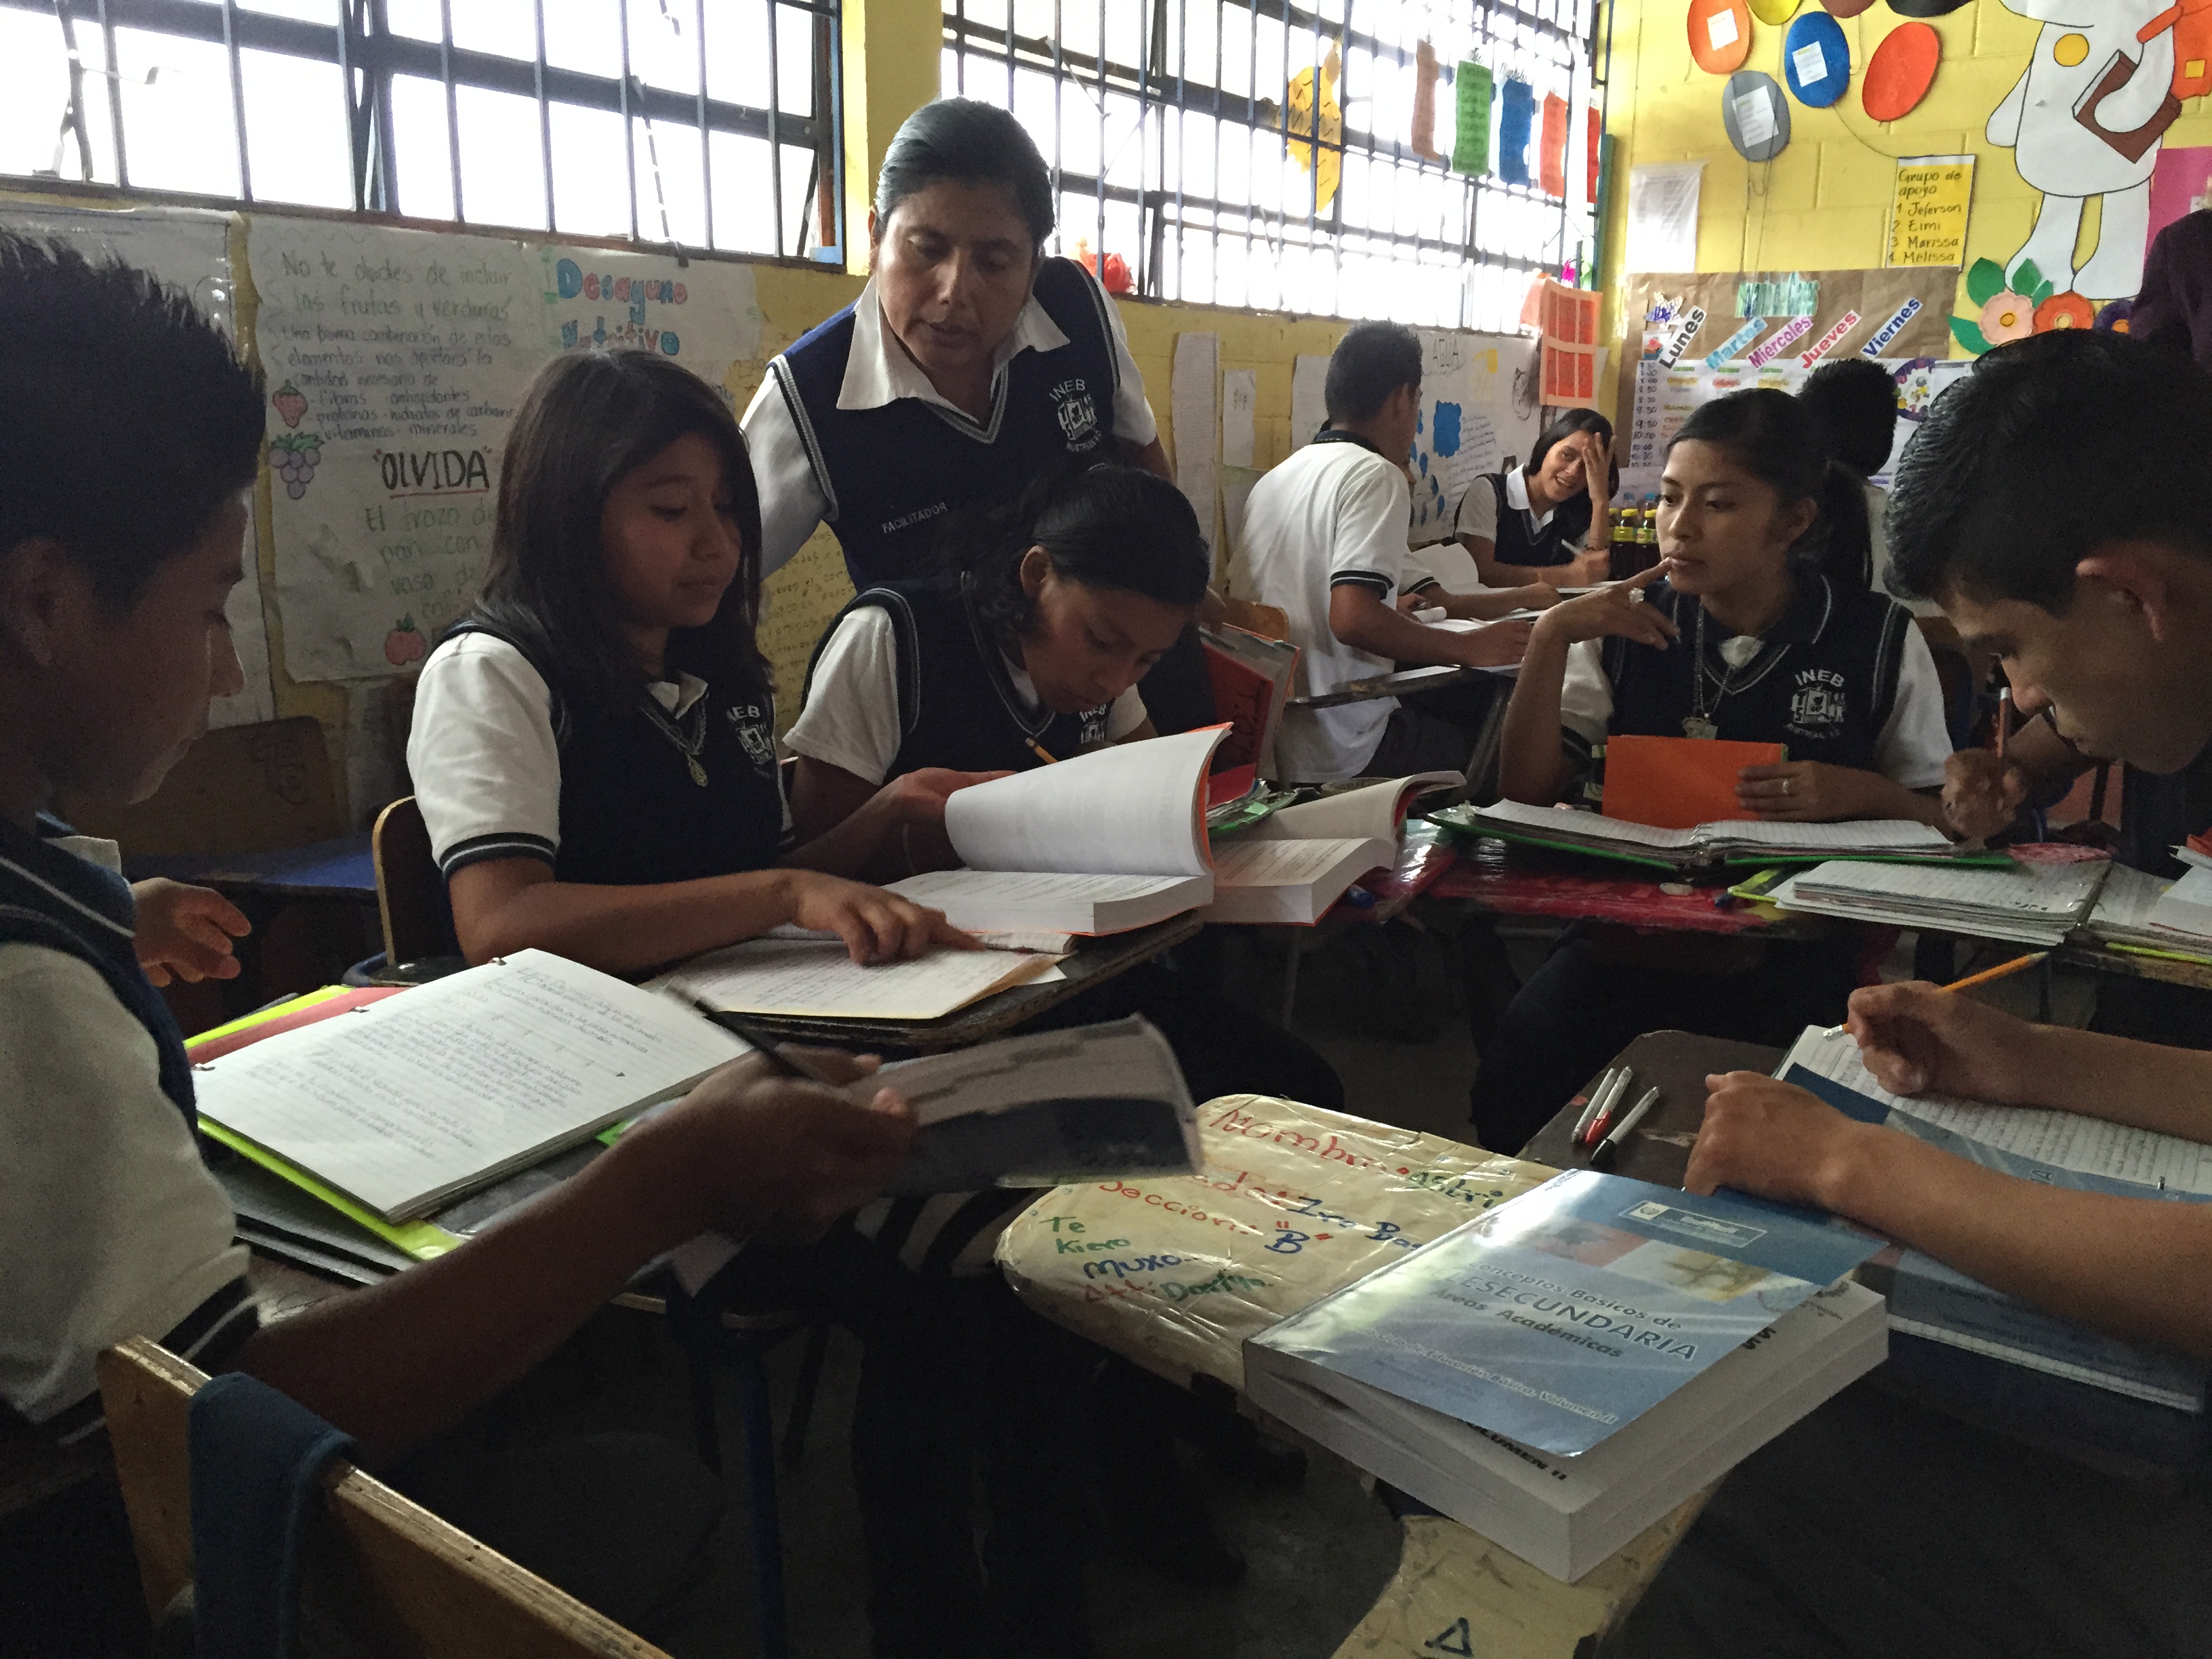 In Guatemala, better tax collection means better education and better jobs